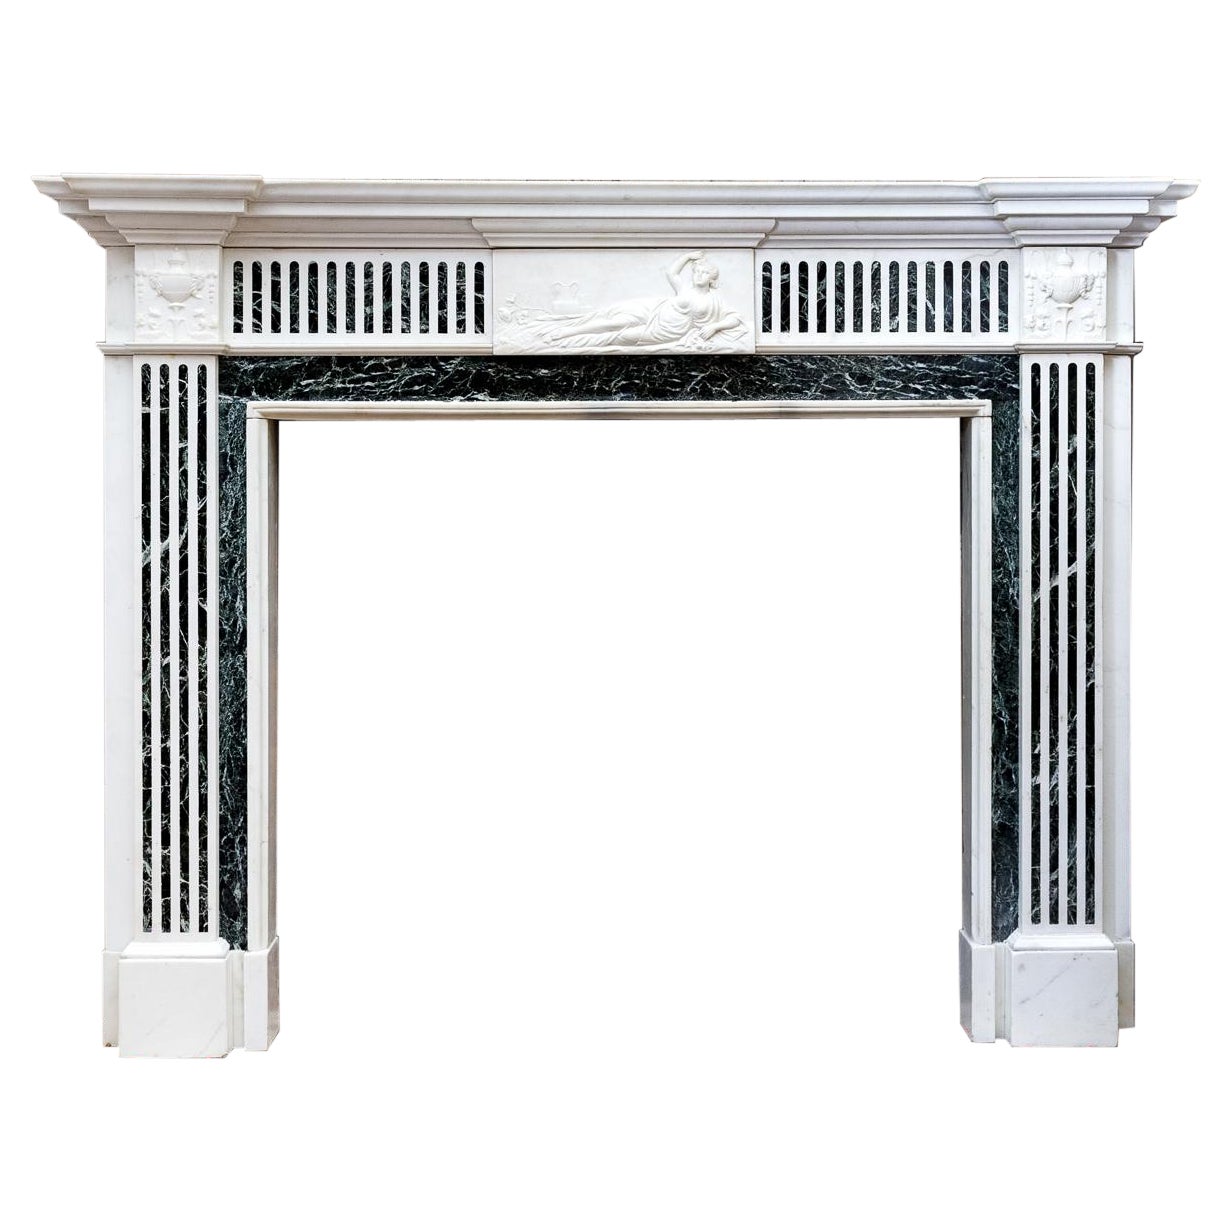 George III Style Statuary and Verde Antico Marble Fireplace Mantel